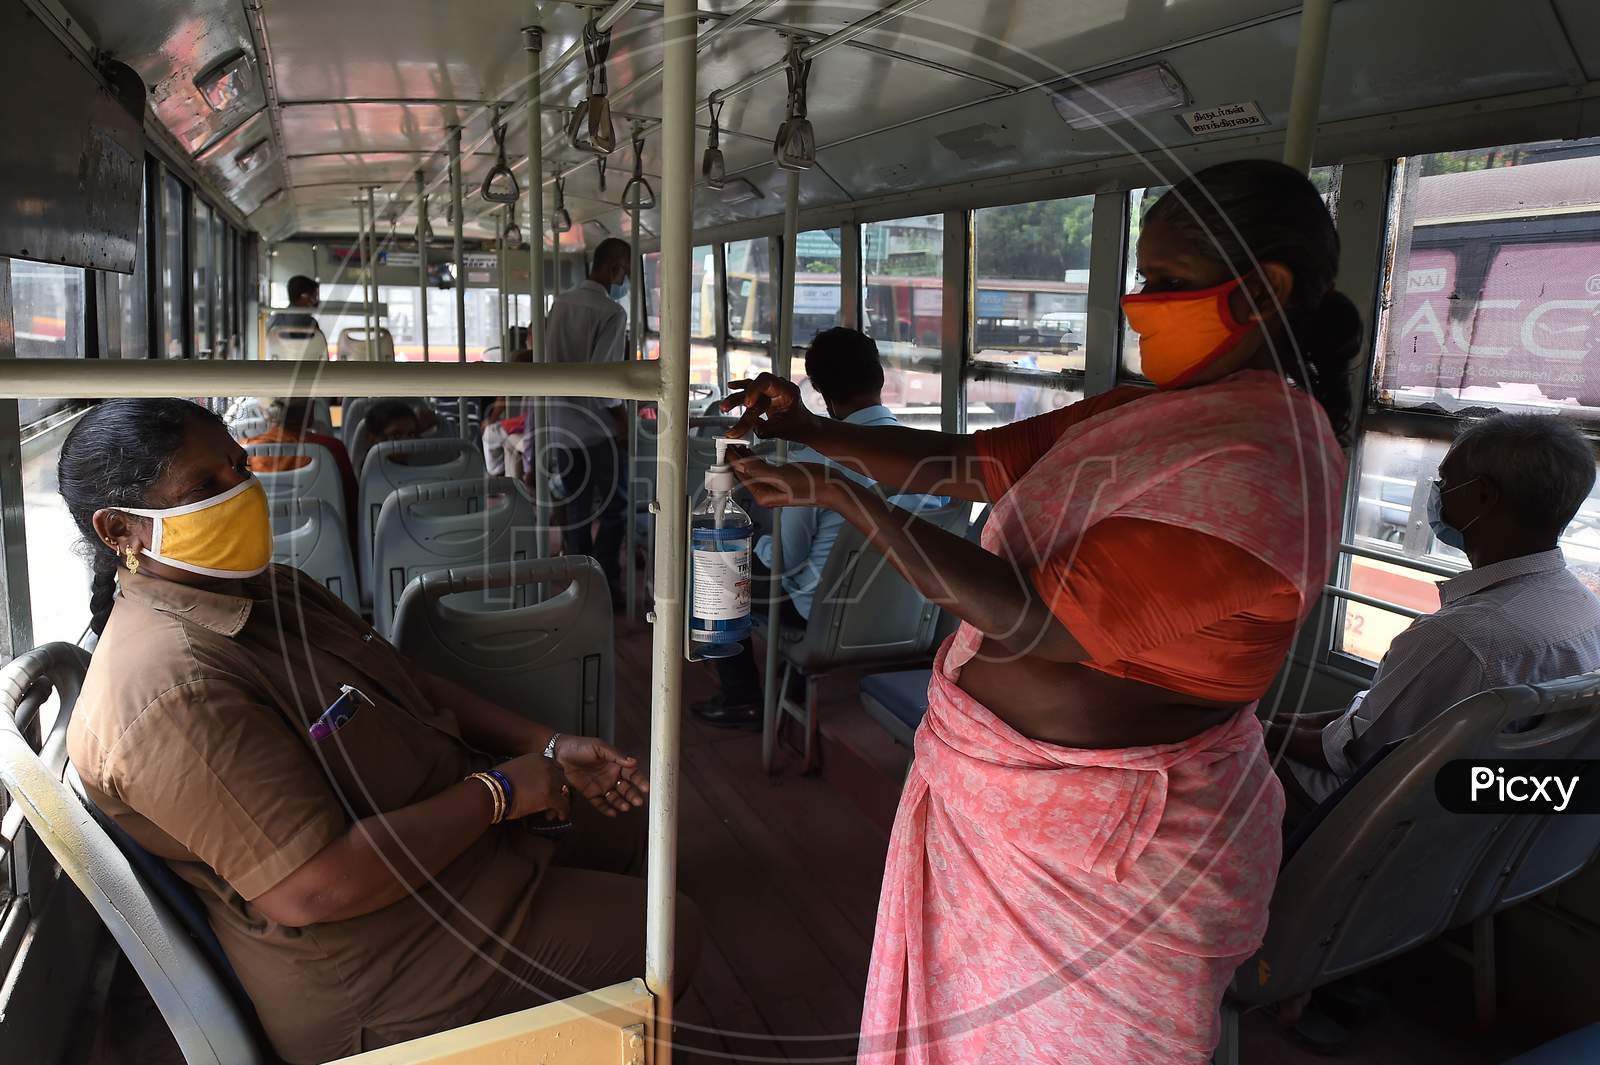 A Women Uses A Sanitiser As She Boards On A Public Bus After The Government Eased A Nationwide Lockdown Imposed As A Preventive Measure Against The Covid-19 Coronavirus, In Chennai On September 1, 2020.